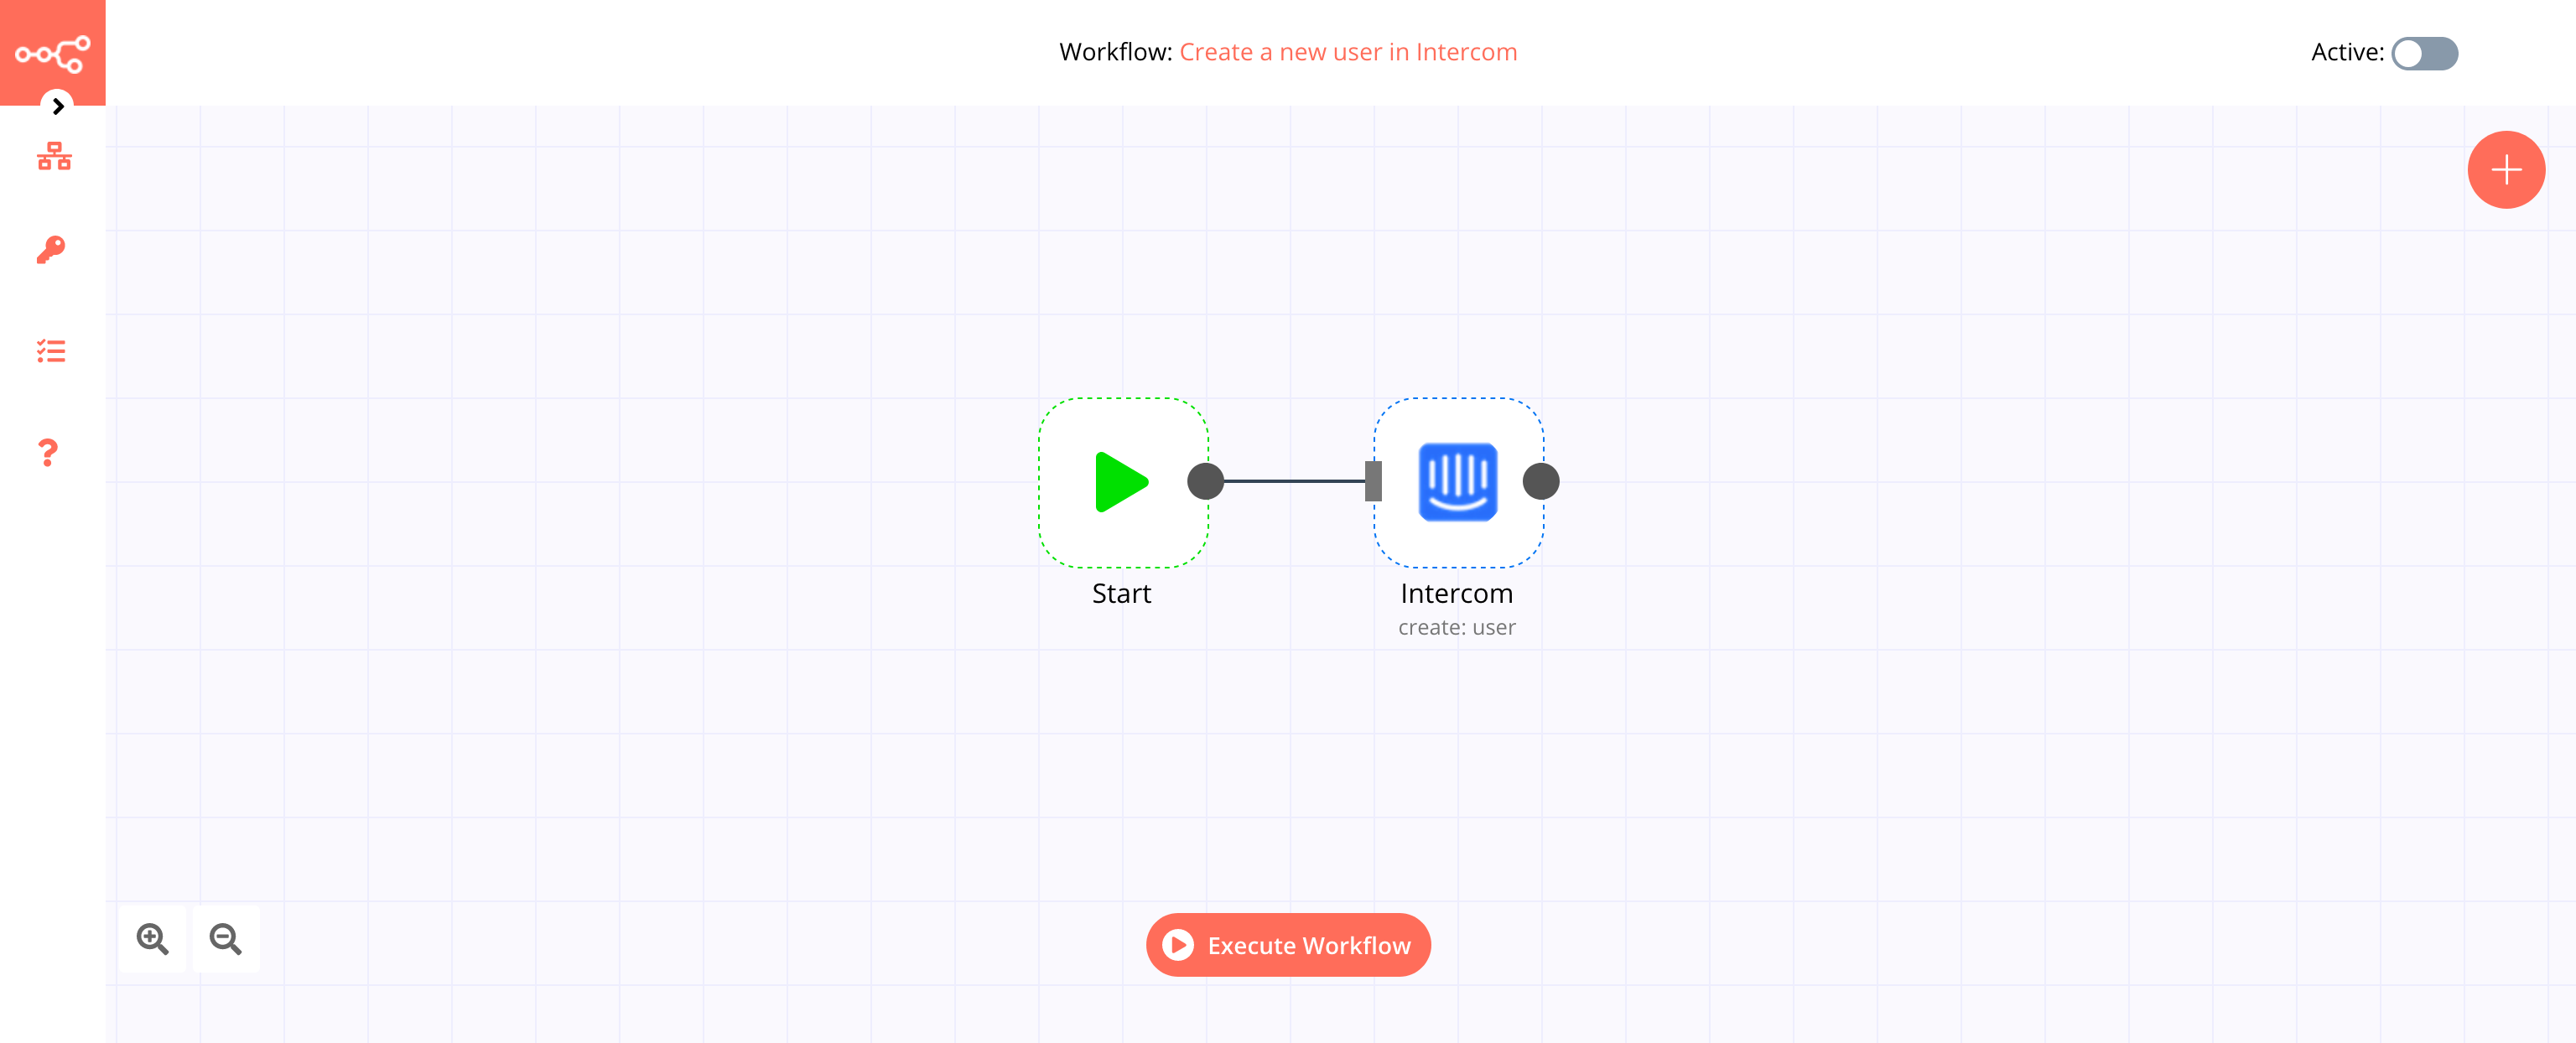 A workflow with the Intercom node